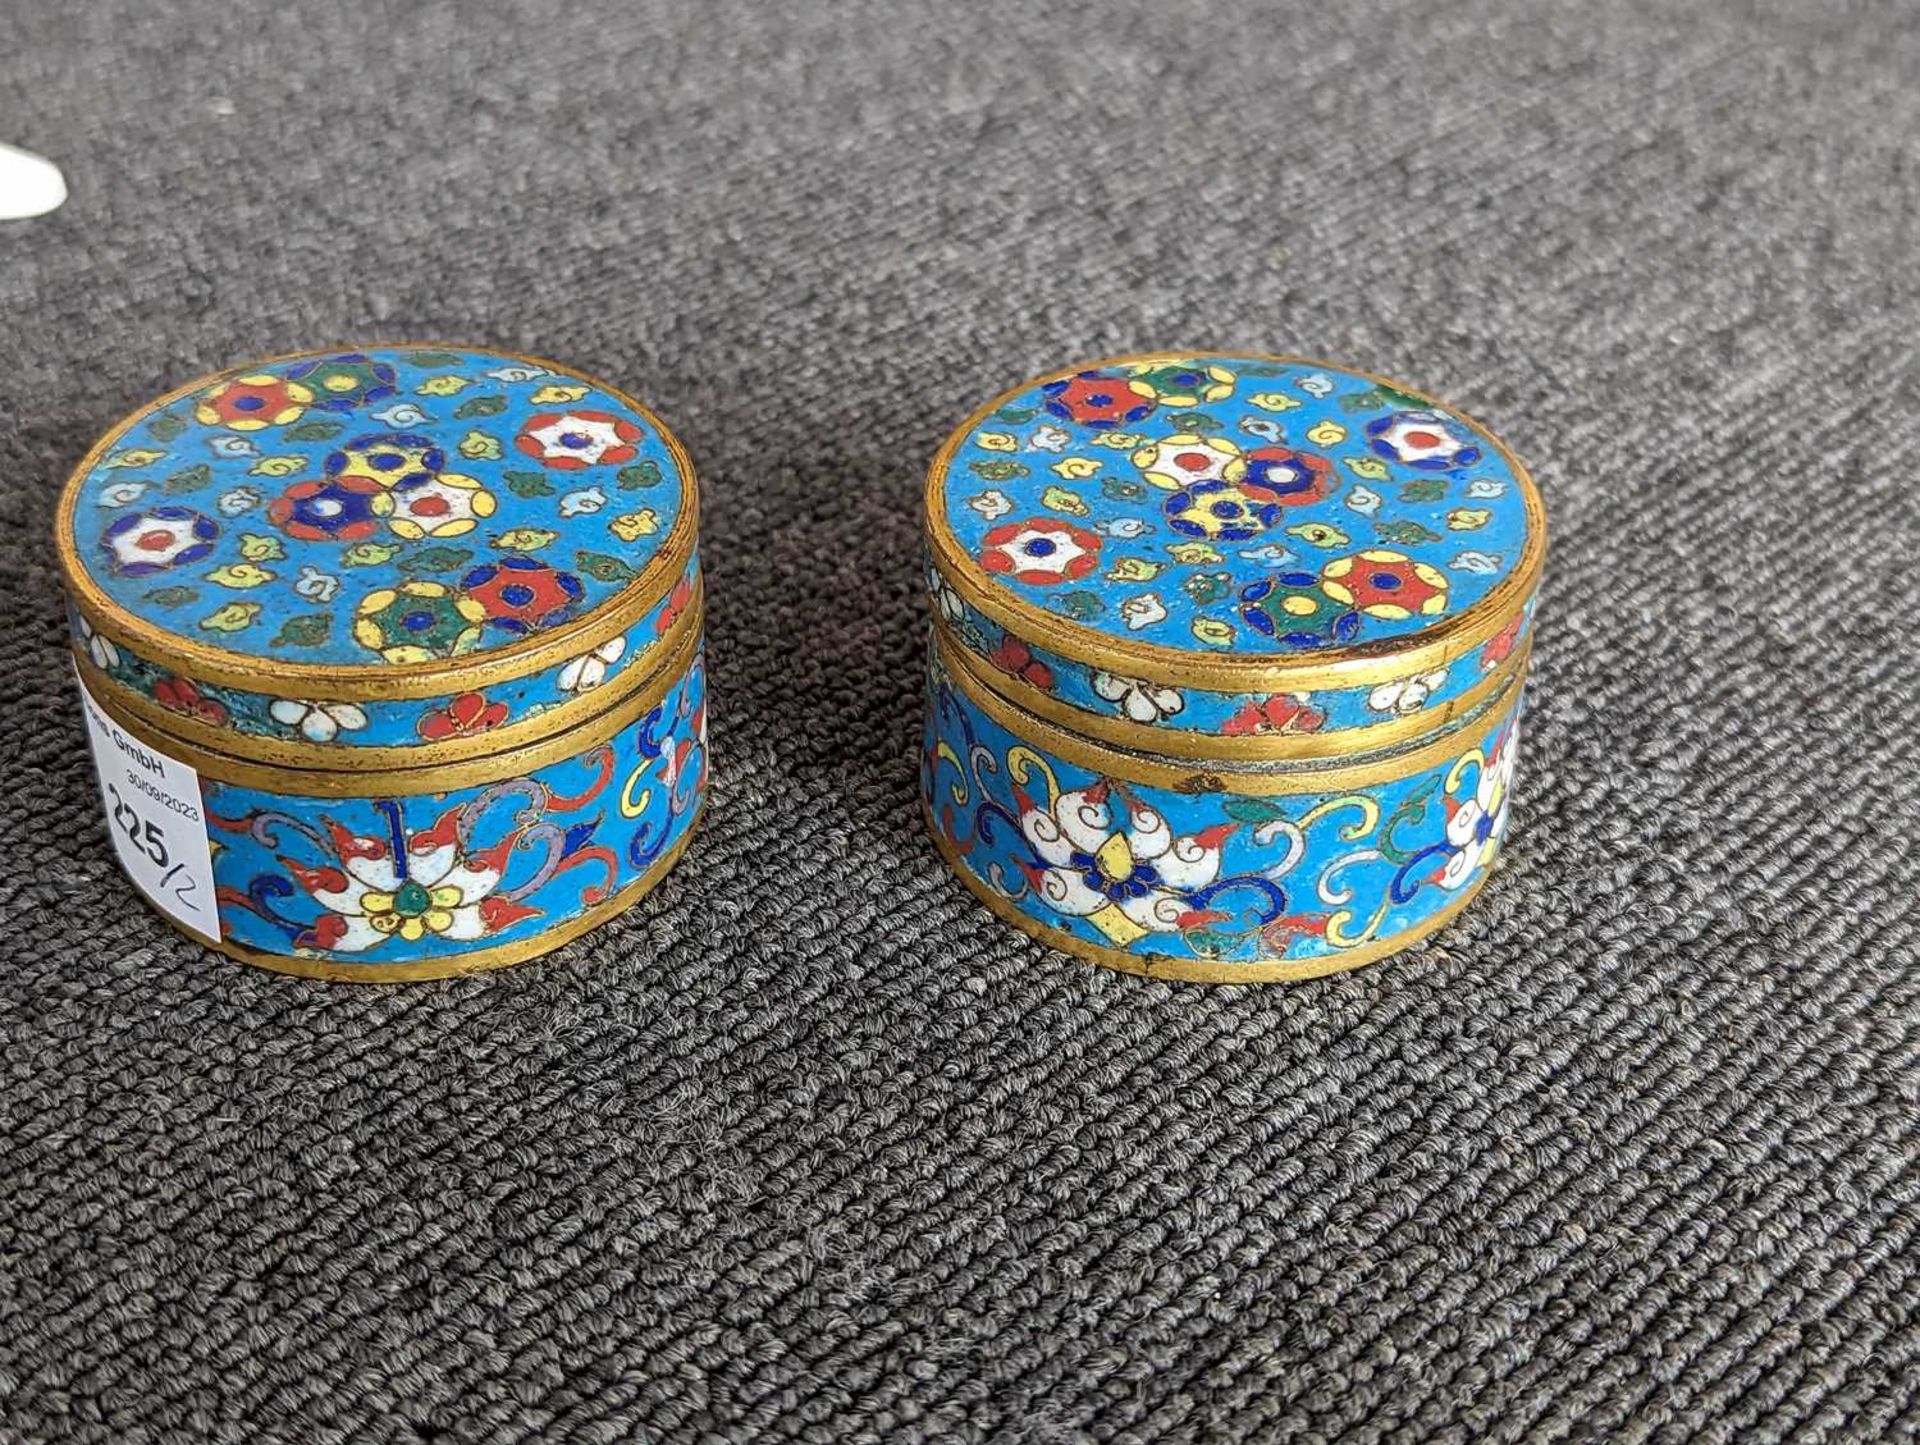 SET OF CLOISONNE BOXES - Image 11 of 15